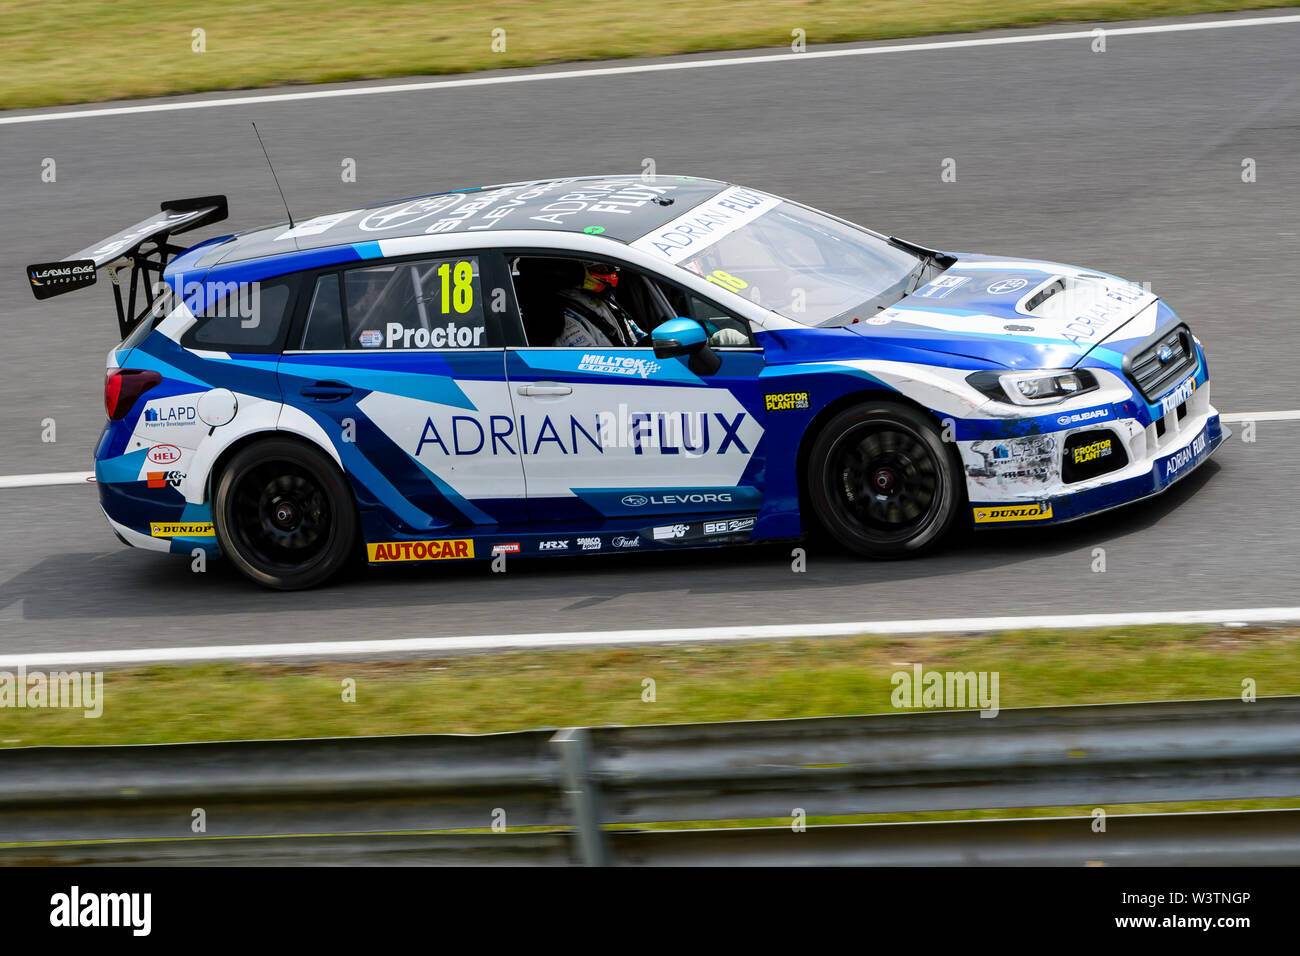 Snetterton, UK. 17 July, 2019. Kwik Fit British Touring Car Championship's summer test at Snetterton on the 17th August 2019 ahead of the series' triple-header race event on 3/4 August. Pictured is Senna Proctor driving the Adrian Flux Subaru Racing Subaru Levorg  Credit: Mark Bullimore/Alamy Live News Stock Photo